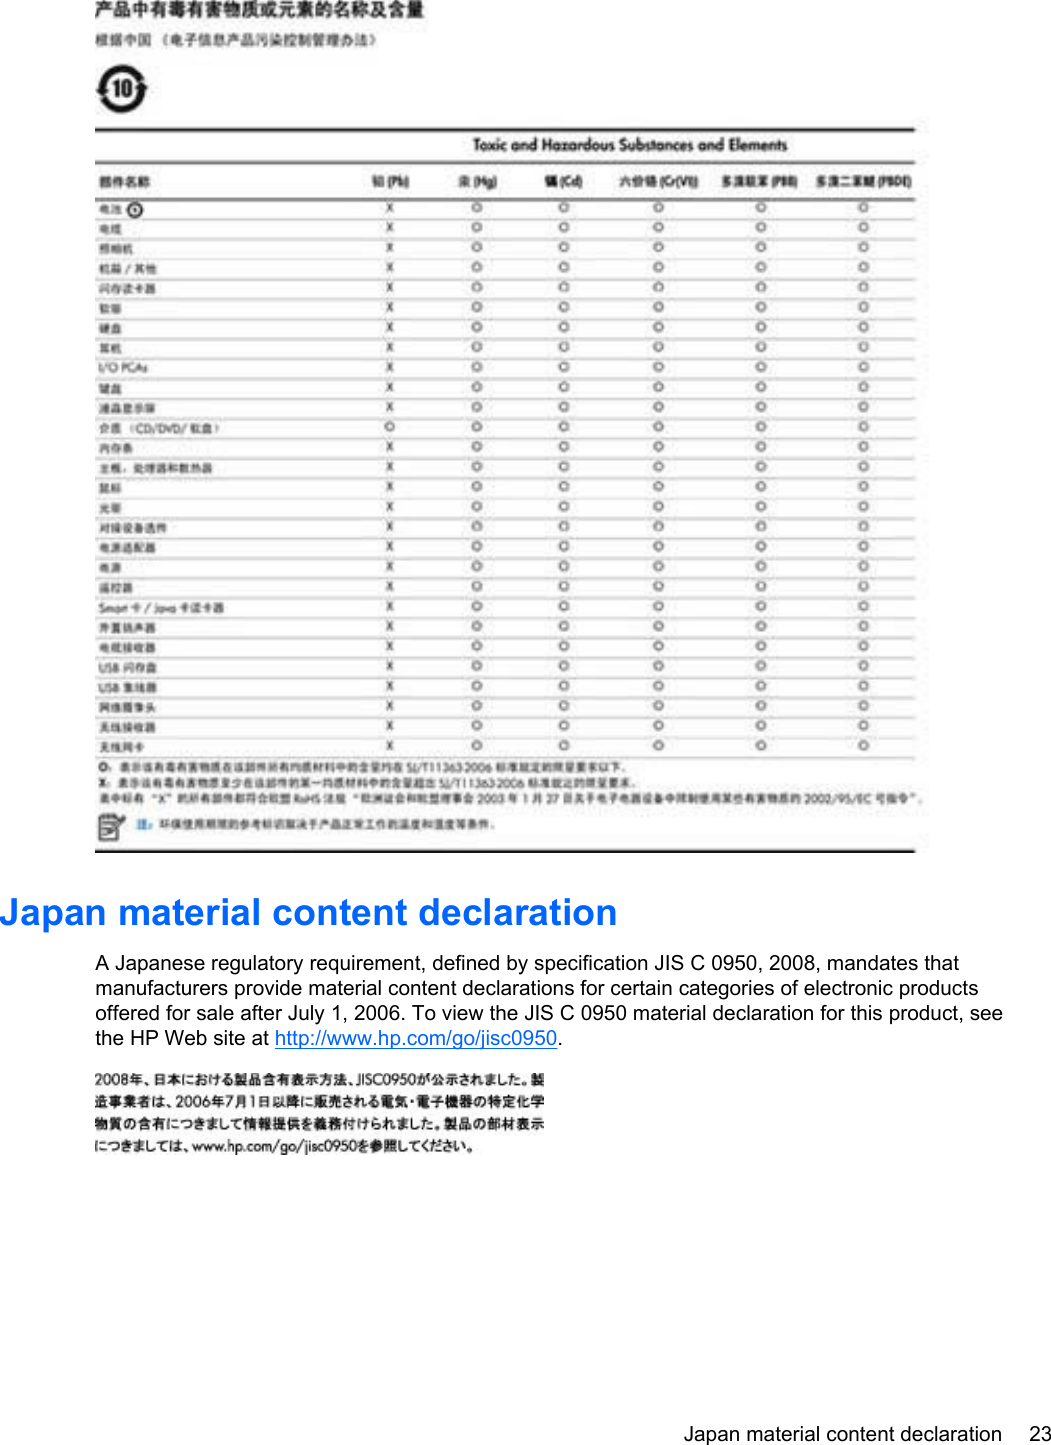 Japan material content declarationA Japanese regulatory requirement, defined by specification JIS C 0950, 2008, mandates thatmanufacturers provide material content declarations for certain categories of electronic productsoffered for sale after July 1, 2006. To view the JIS C 0950 material declaration for this product, seethe HP Web site at http://www.hp.com/go/jisc0950.Japan material content declaration 23